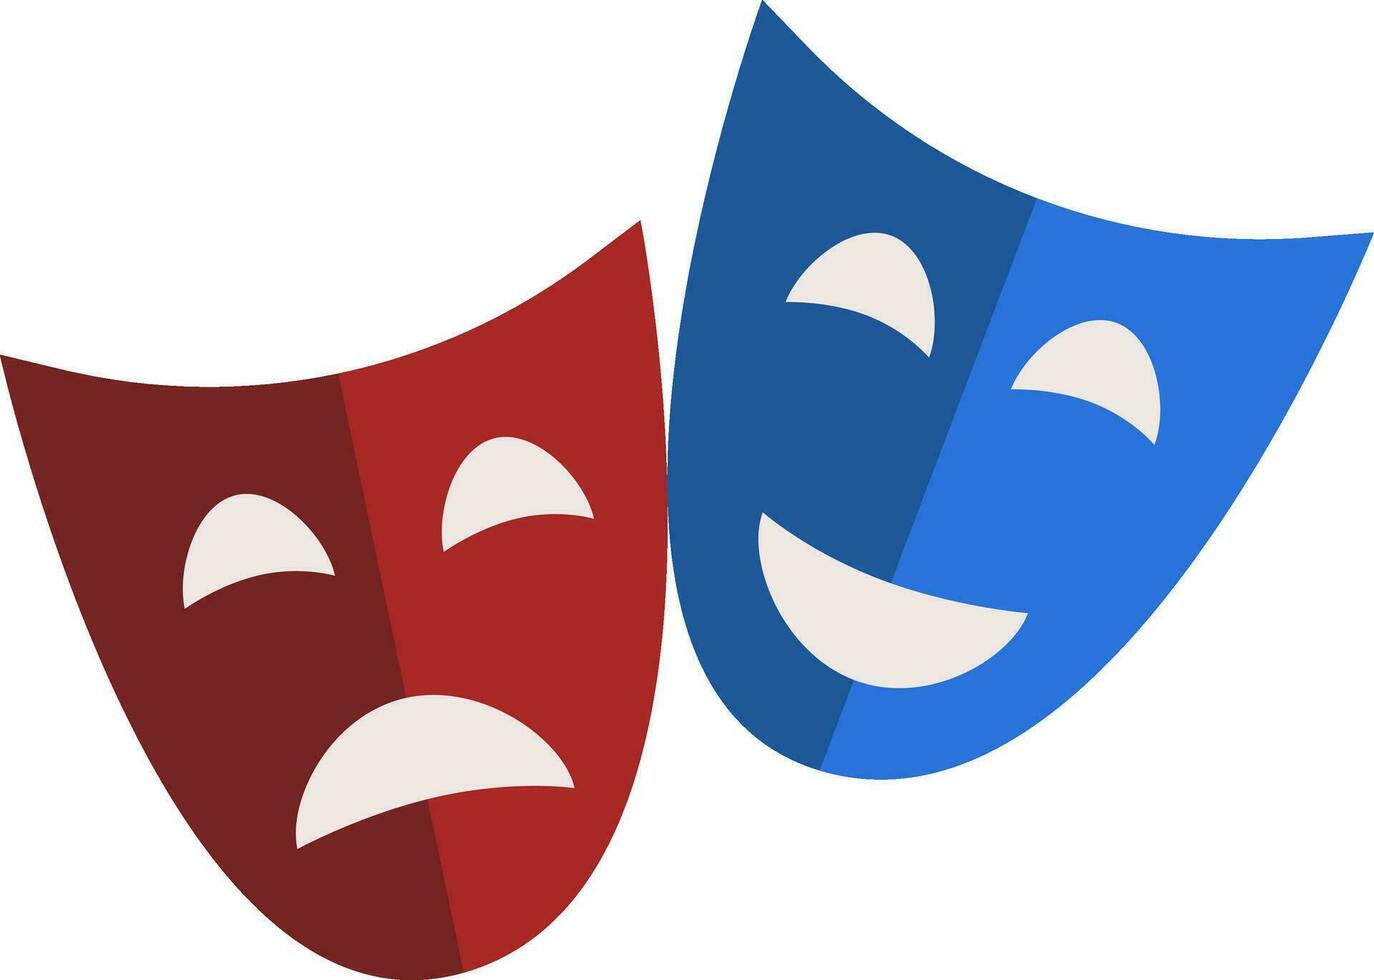 Comedy and tragic mask of red and blue color used in theatres vector color drawing or illustration